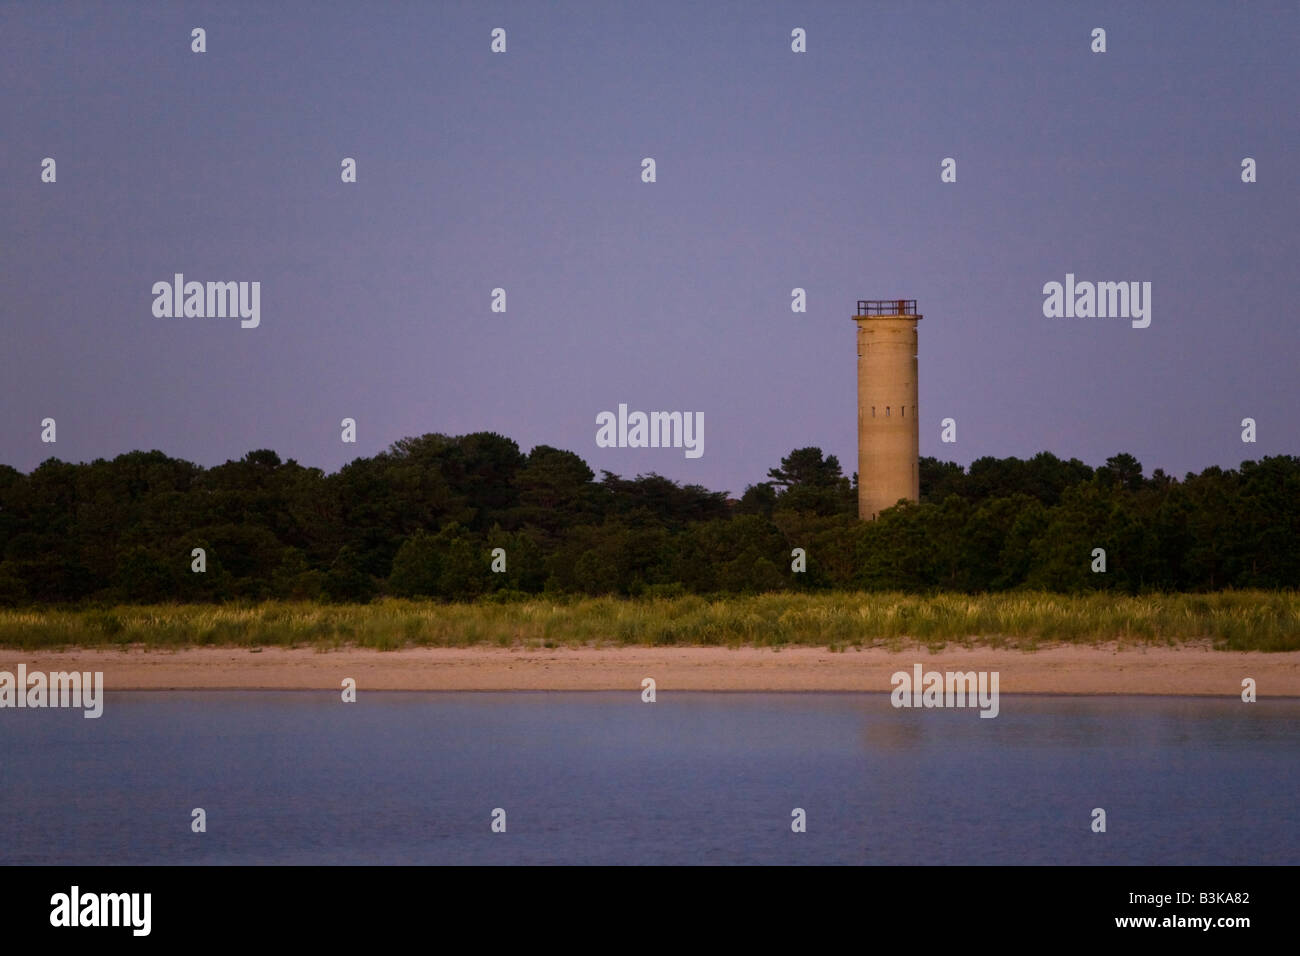 WWII Aussichtsturm am Fort Miles im Cape Henlopen State Park, Lewes, Delaware. Stockfoto